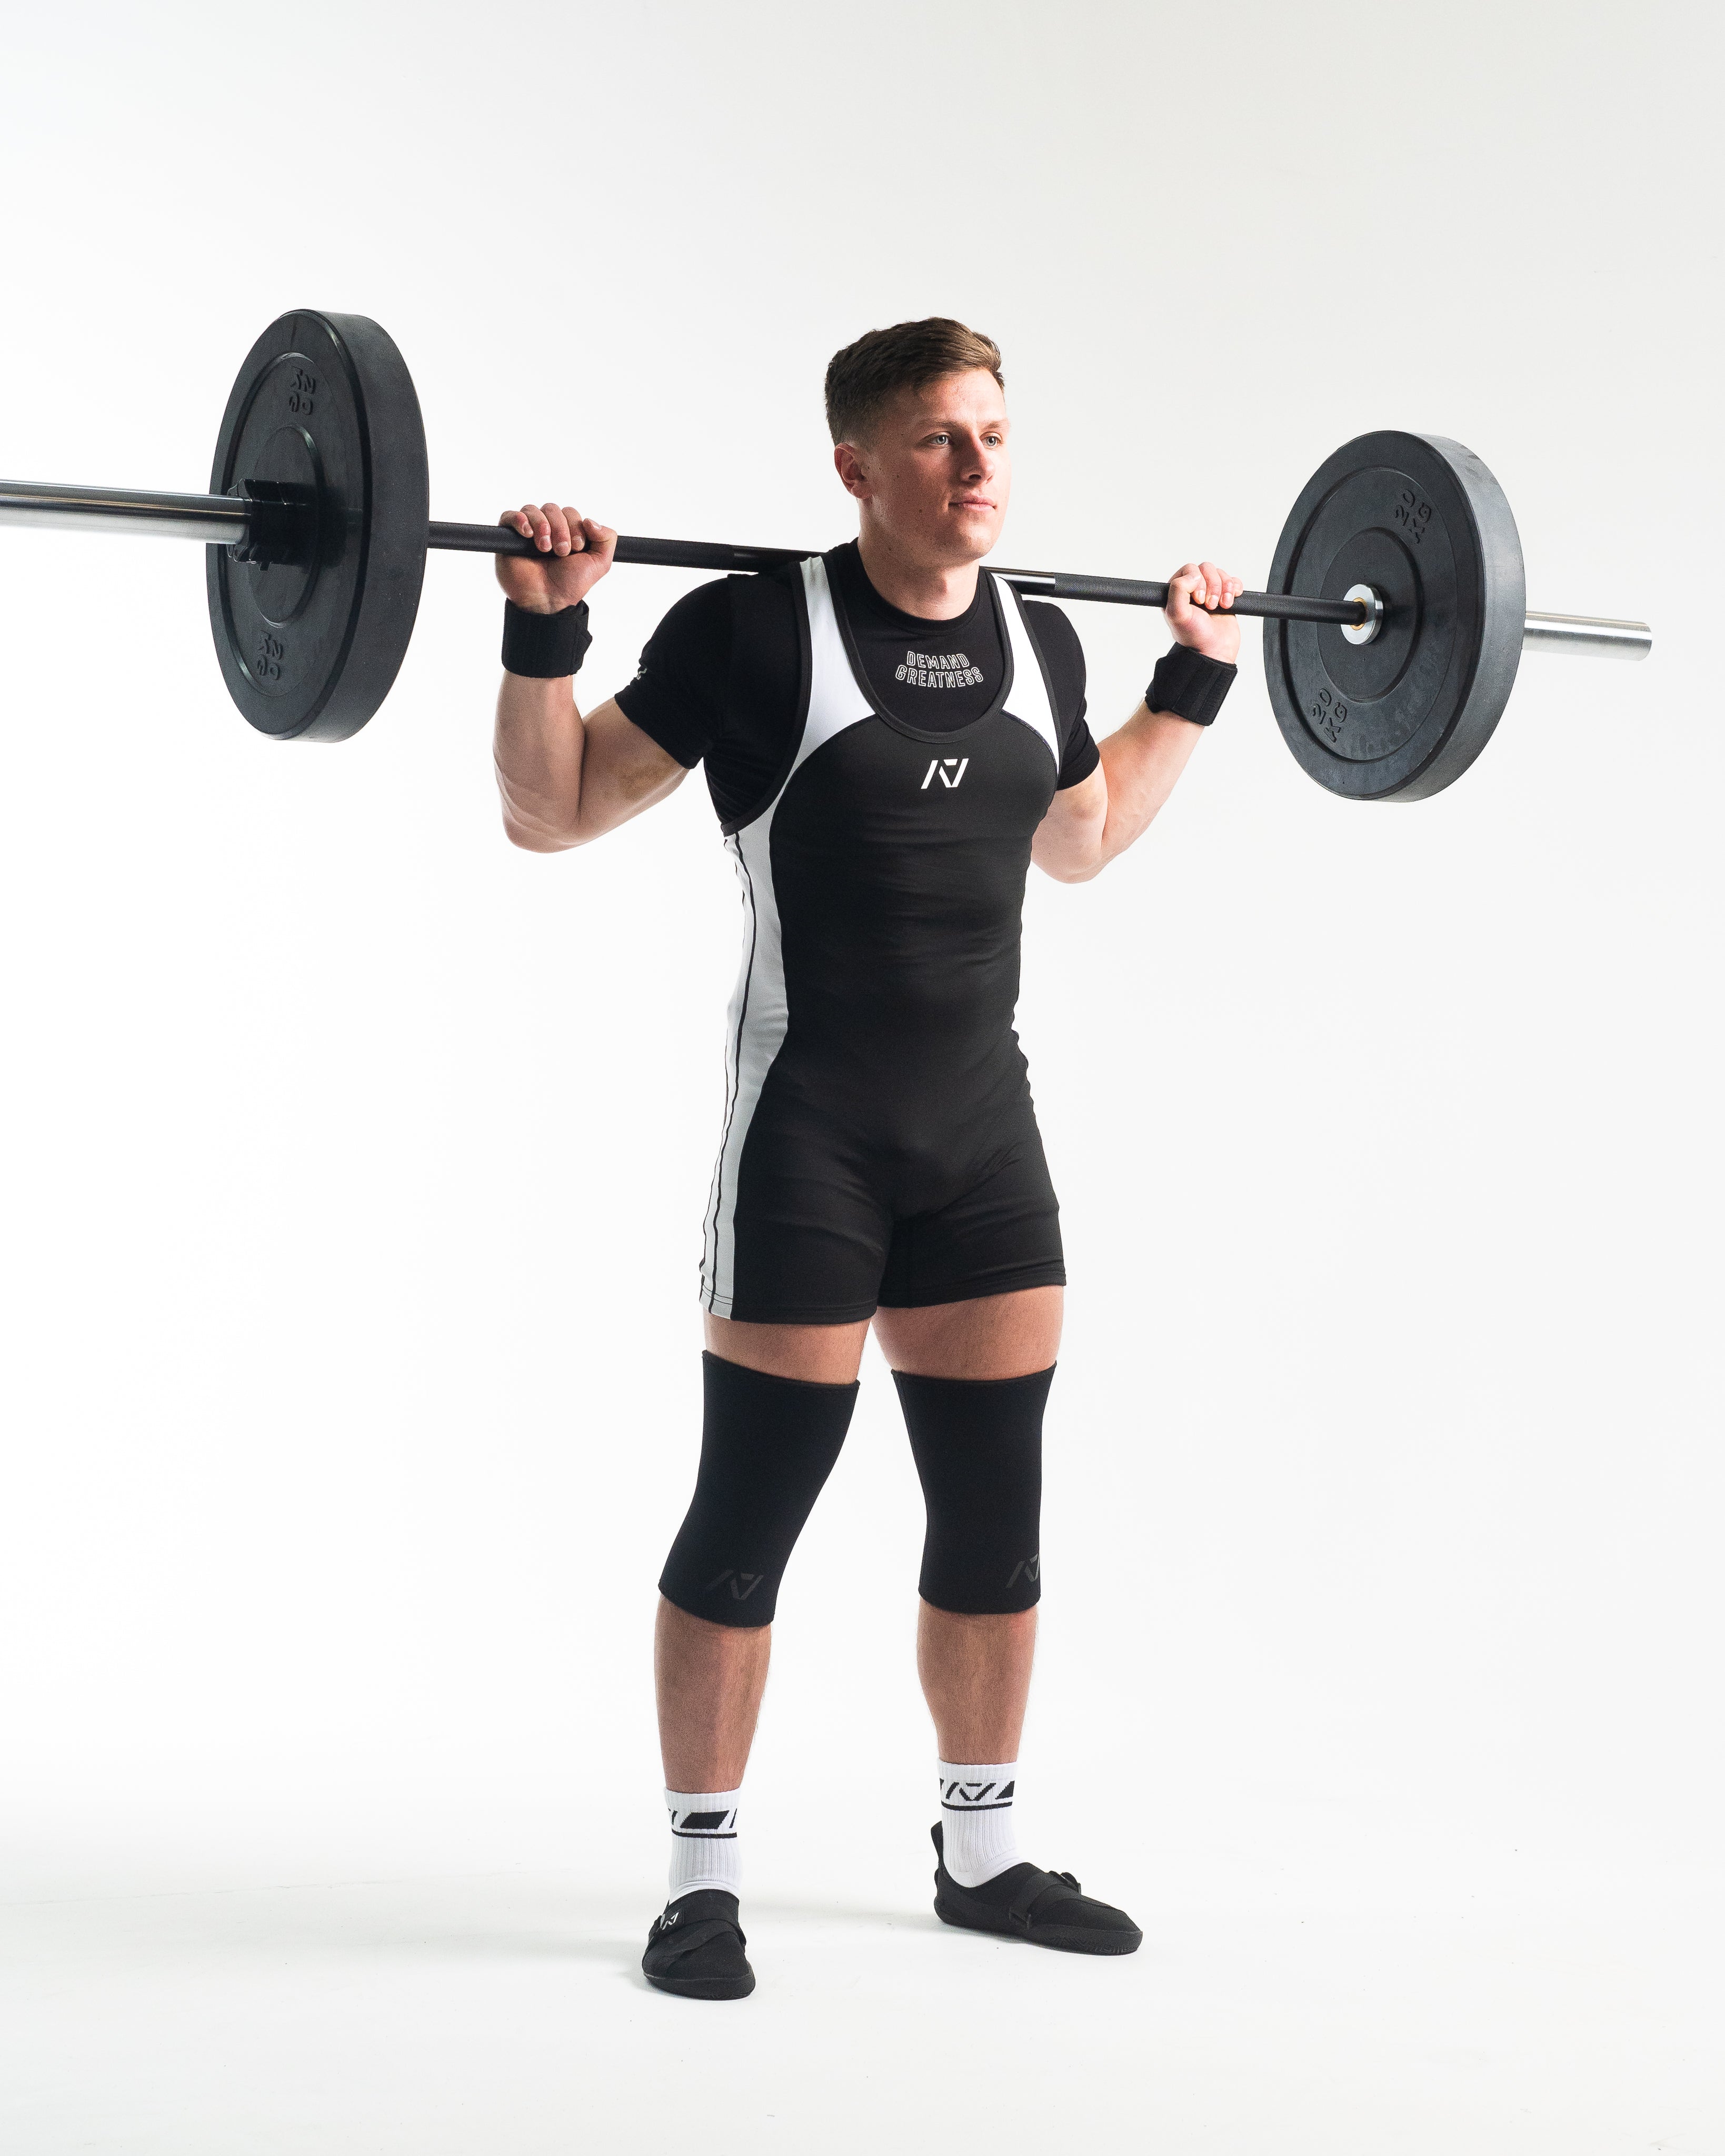 A7 IPF Approved Domino Luno singlet features extra lat mobility, side panel stitching to guide the squat depth level and curved panel design for a slimming look. The Women's cut singlet features a tapered waist and additional quad room. The IPF Approved Kit includes Powerlifting Singlet, A7 Meet Shirt, A7 Zebra Wrist Wraps, A7 Deadlift Socks, Hourglass Knee Sleeves (Stiff Knee Sleeves and Rigor Mortis Knee Sleeves). Genouillères powerlifting shipping to France, Spain, Ireland, Germany, Italy, Sweden and EU.